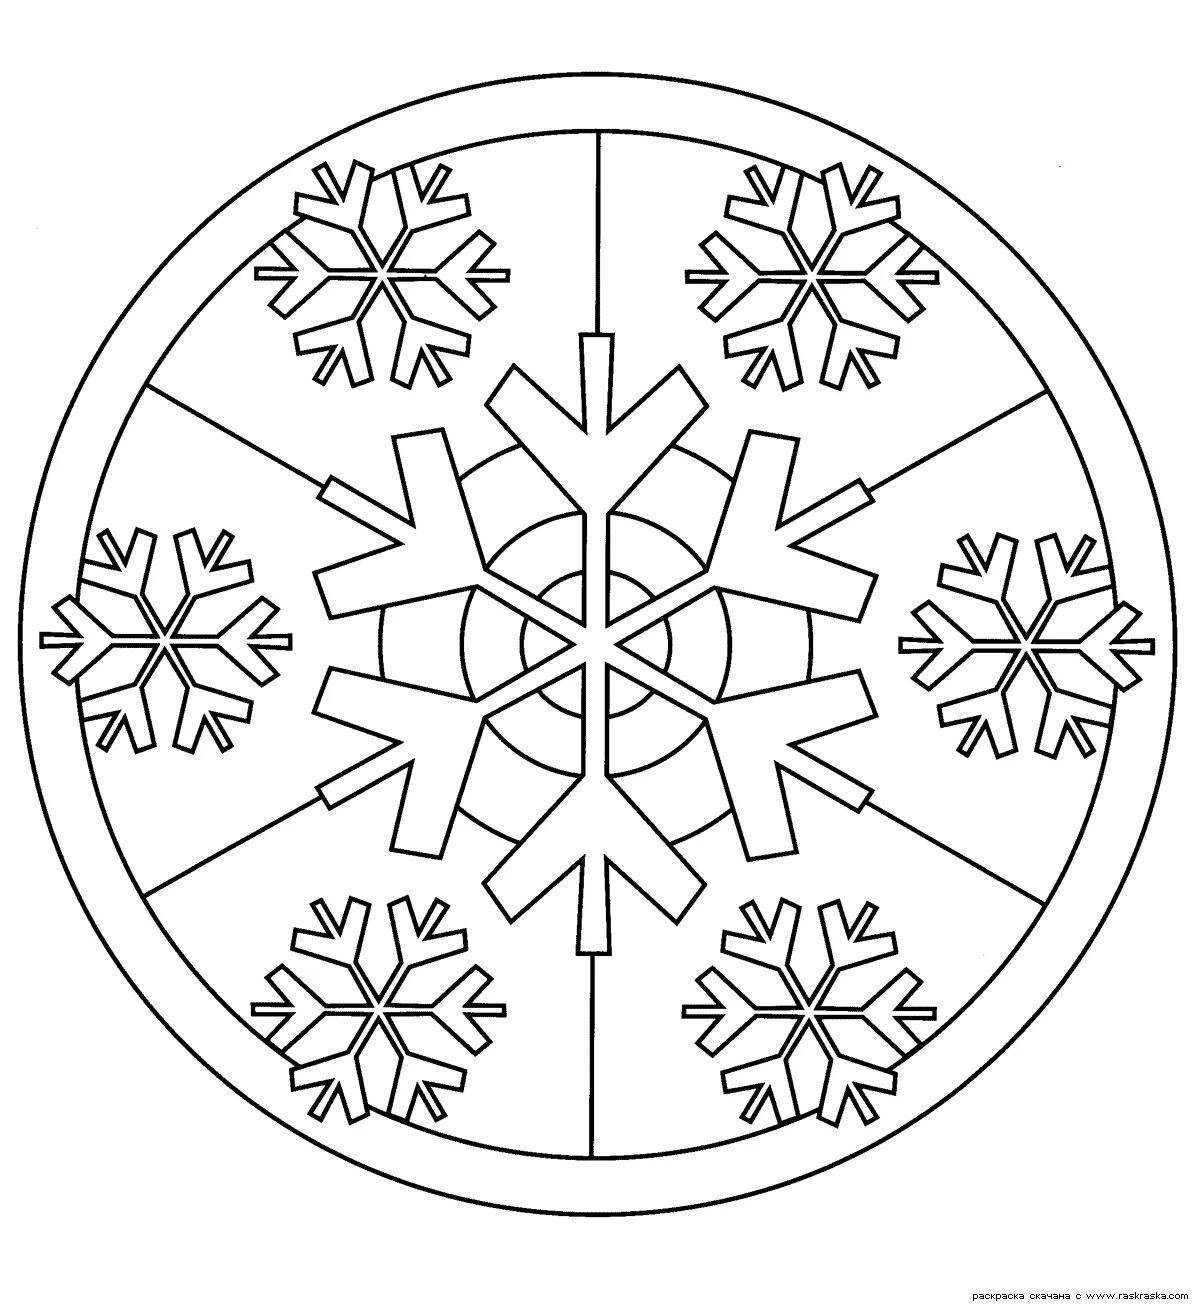 Fancy coloring pages with christmas patterns